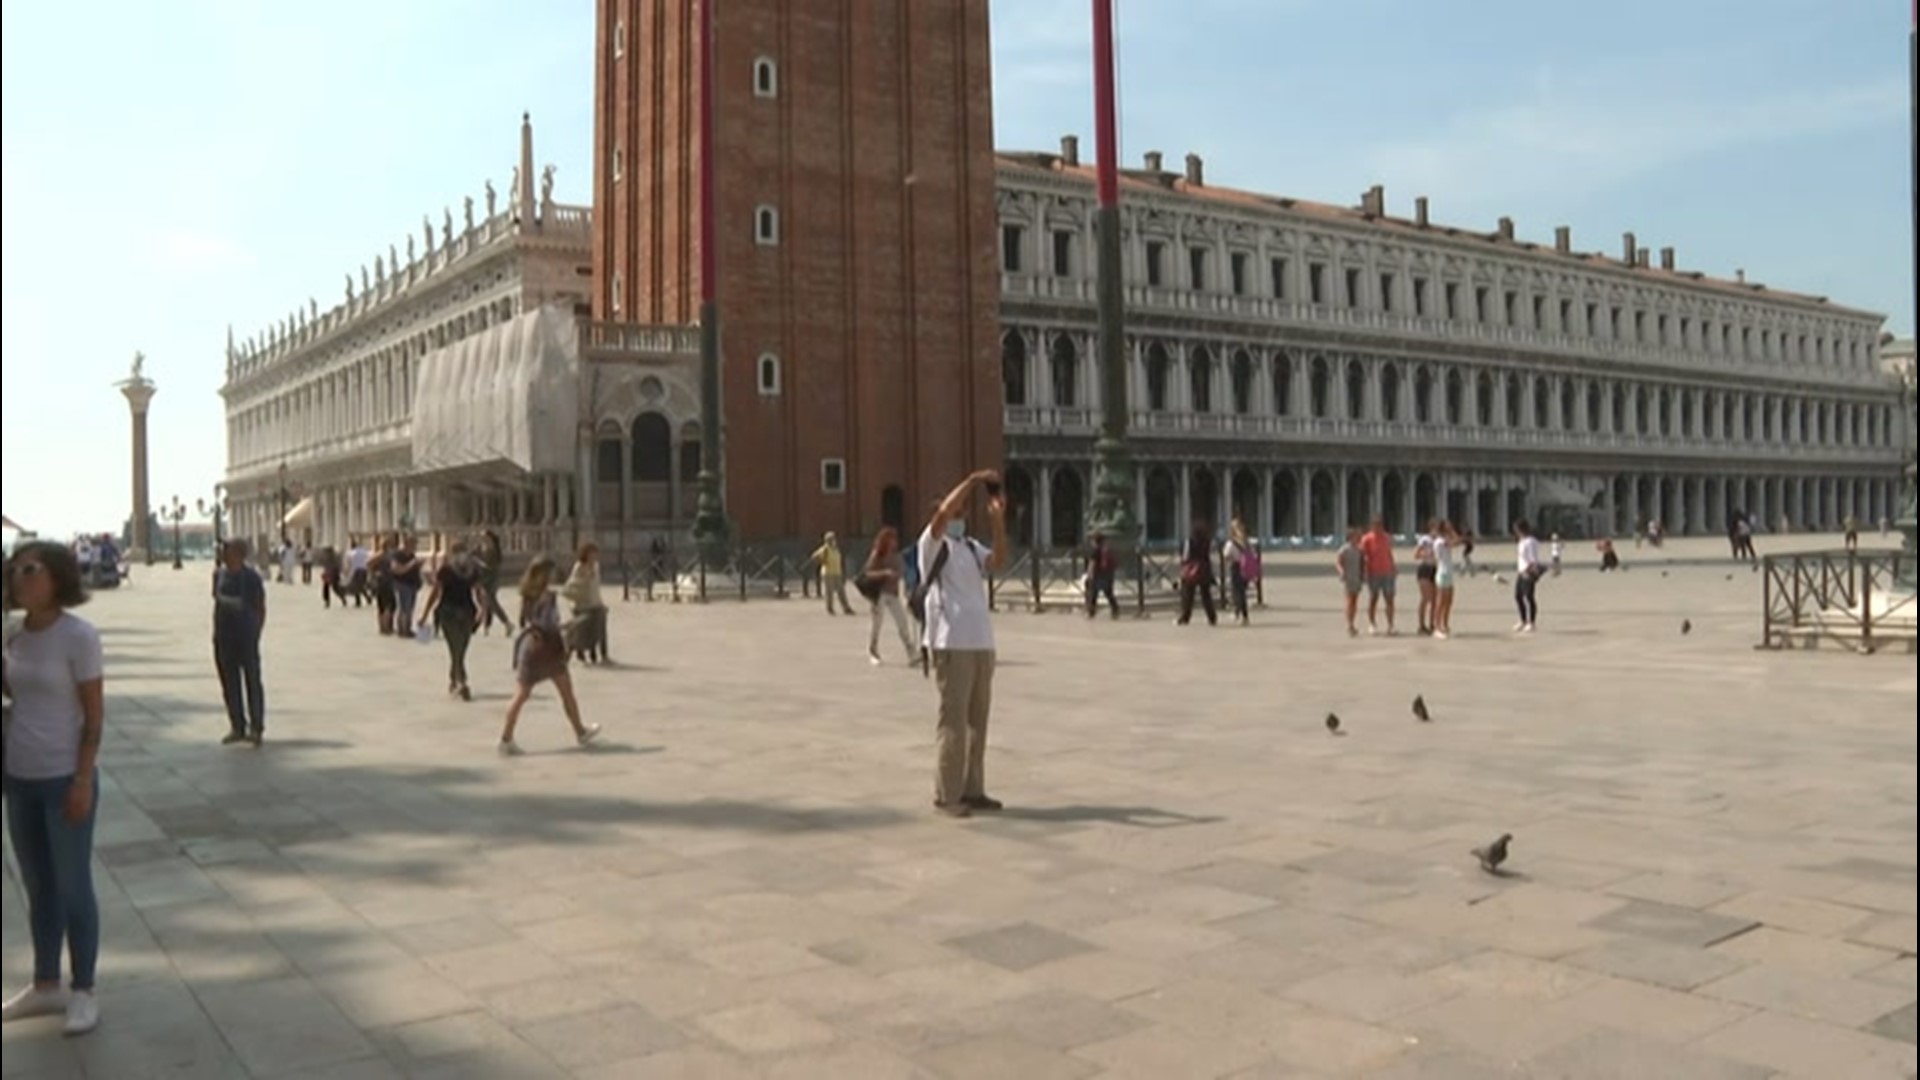 With Italy reopening to European travelers, people walked around  St. Mark's Square in Venice on June 3, snapping photos and enjoying the sights.